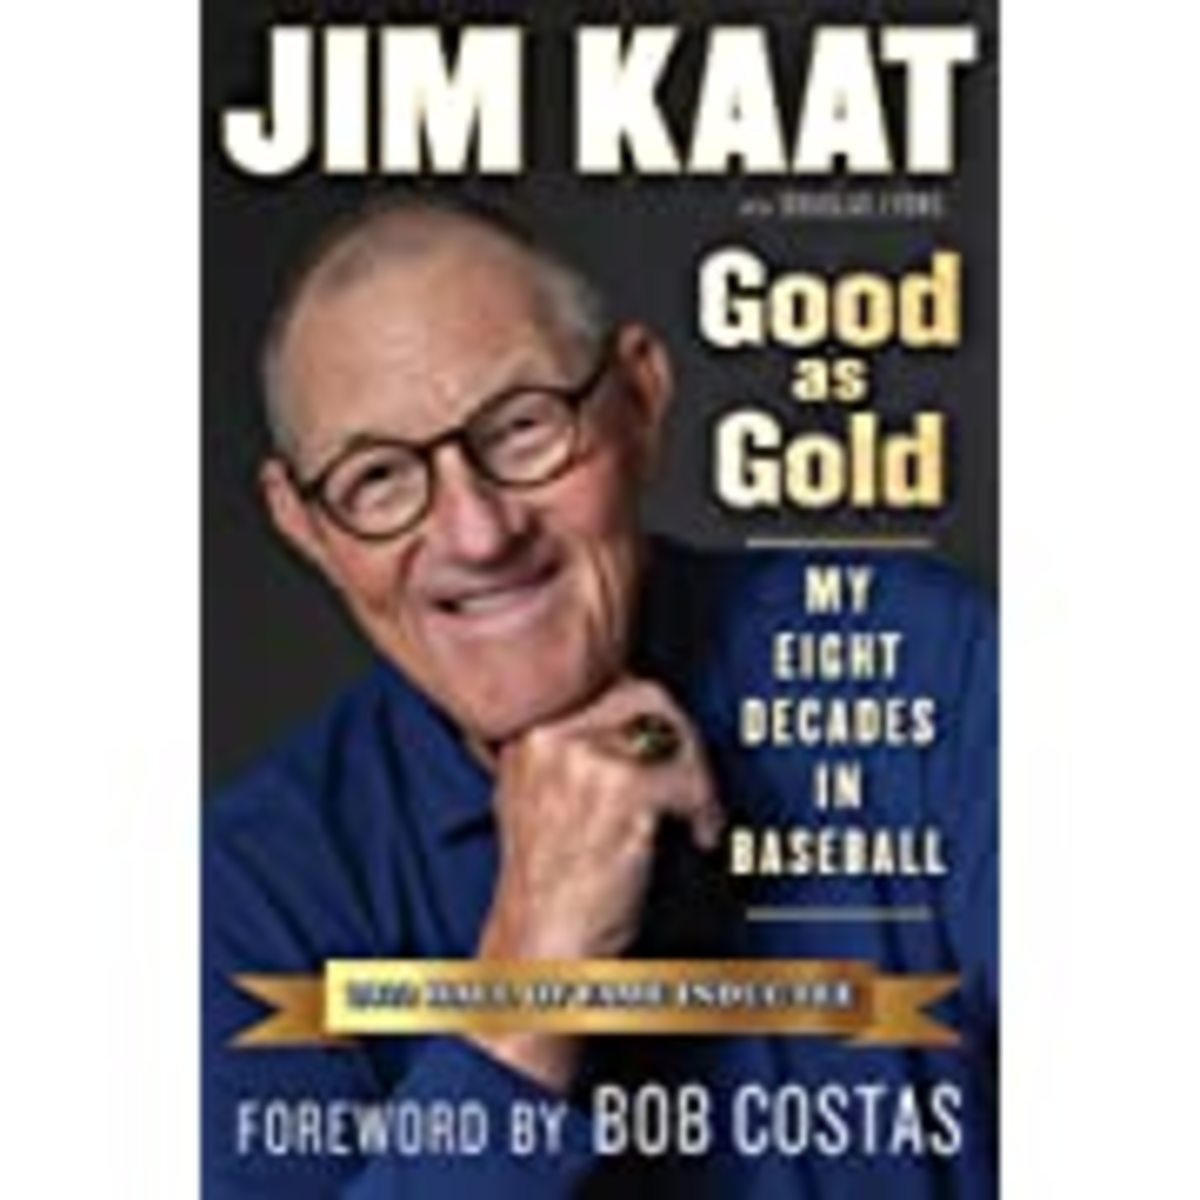 Good as Gold: My Eight Decades in Baseball.